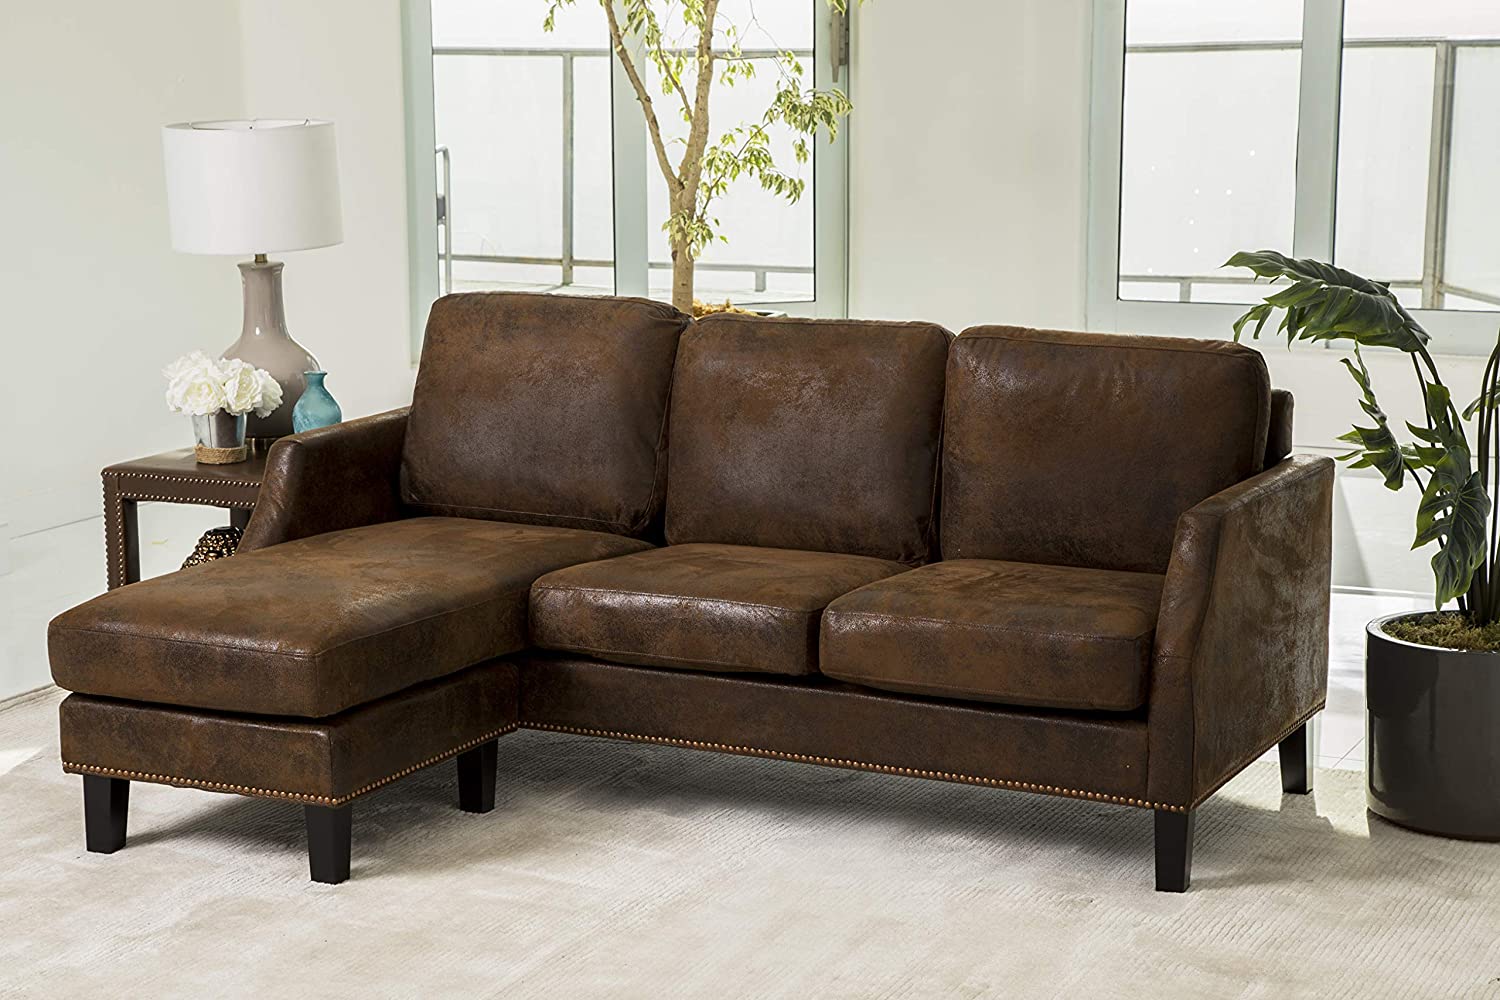 buy faux leather sofa online